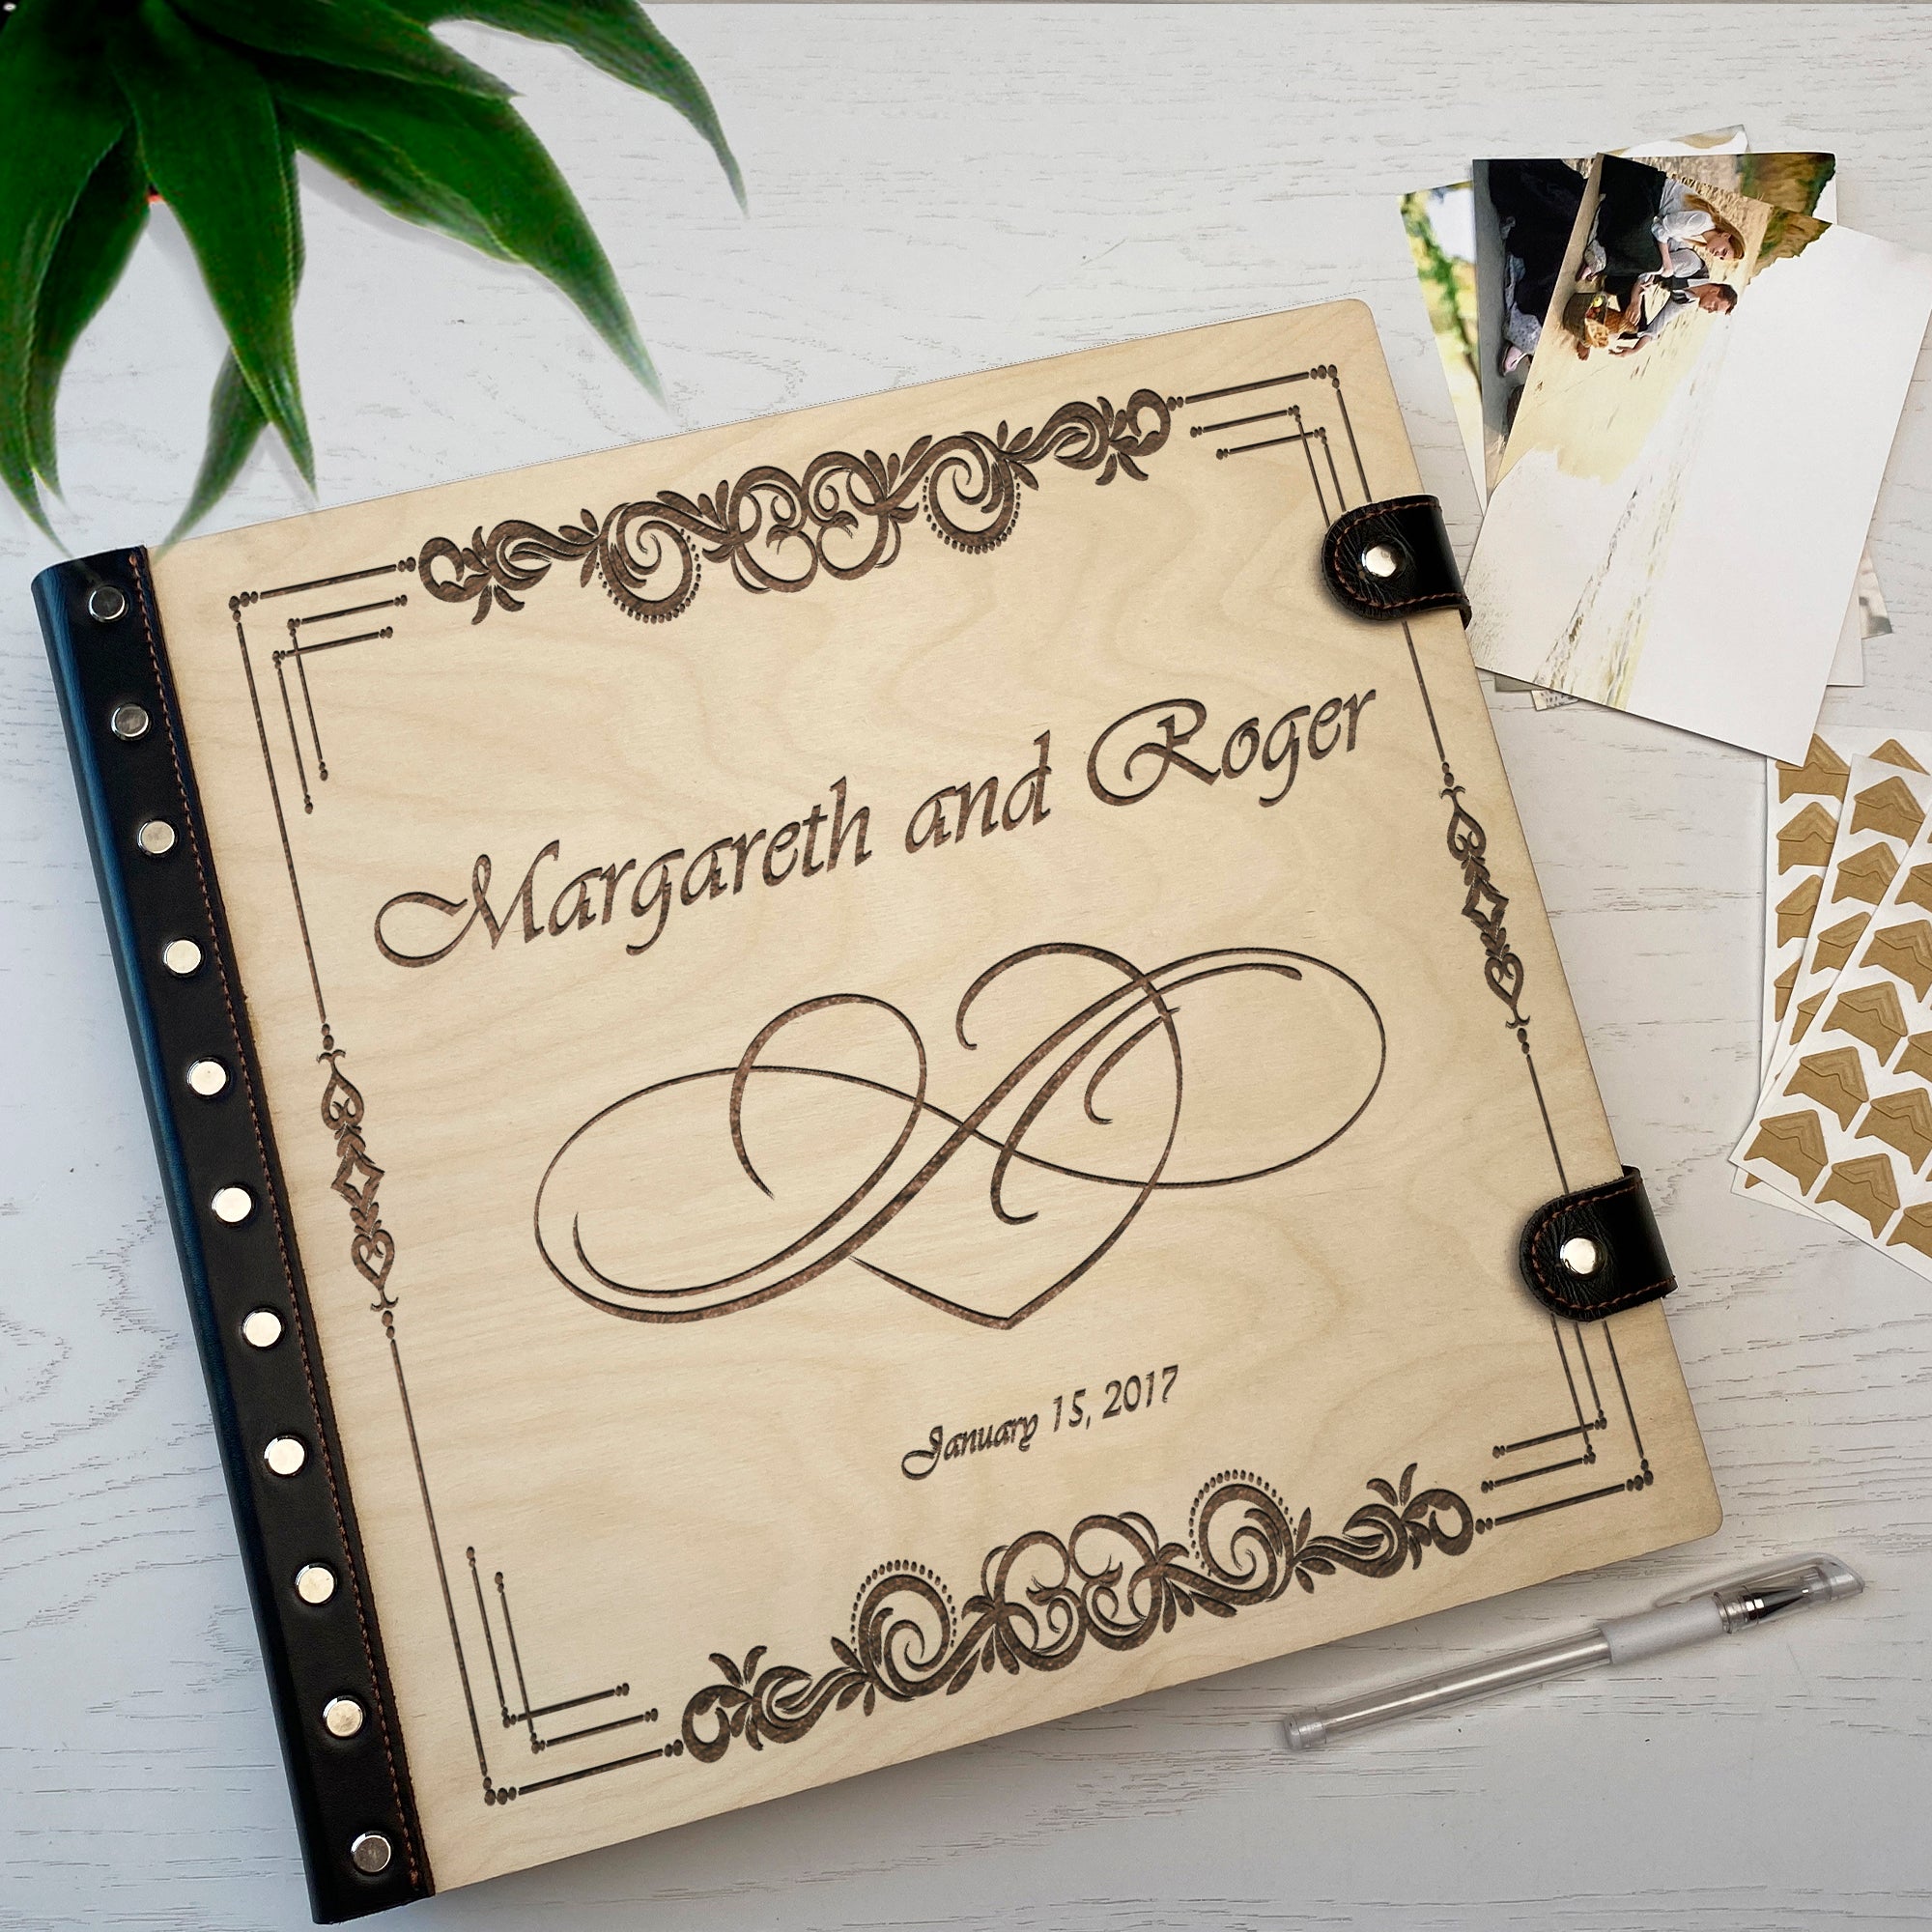 Personalized photo album with leather cover and Love engraving